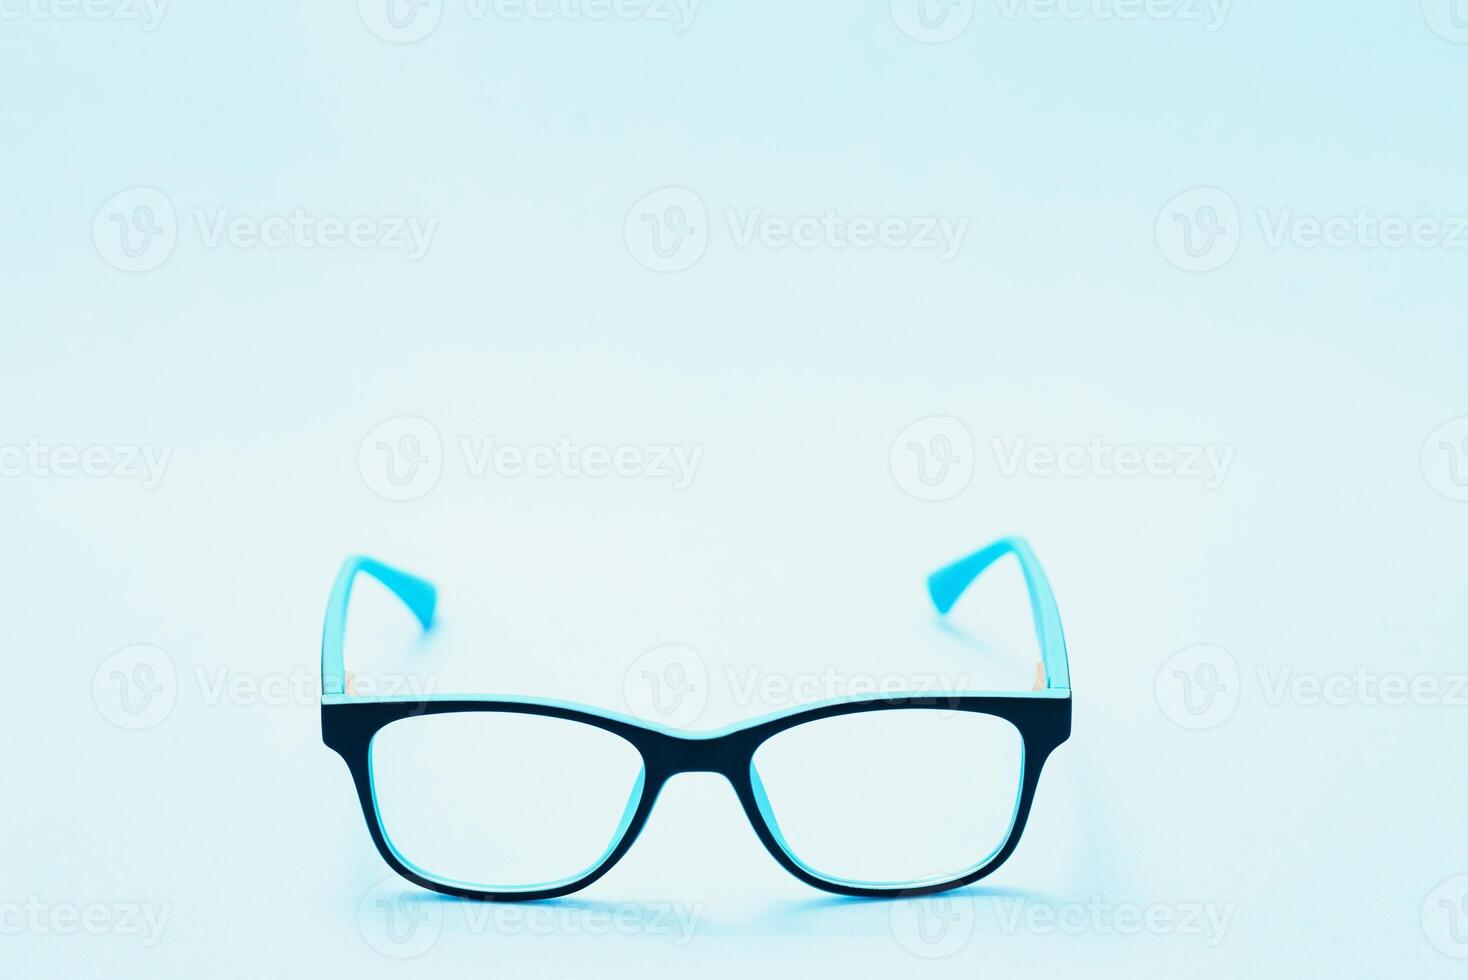 pair of red plastic-rimmed eyeglasses on a blue background photo